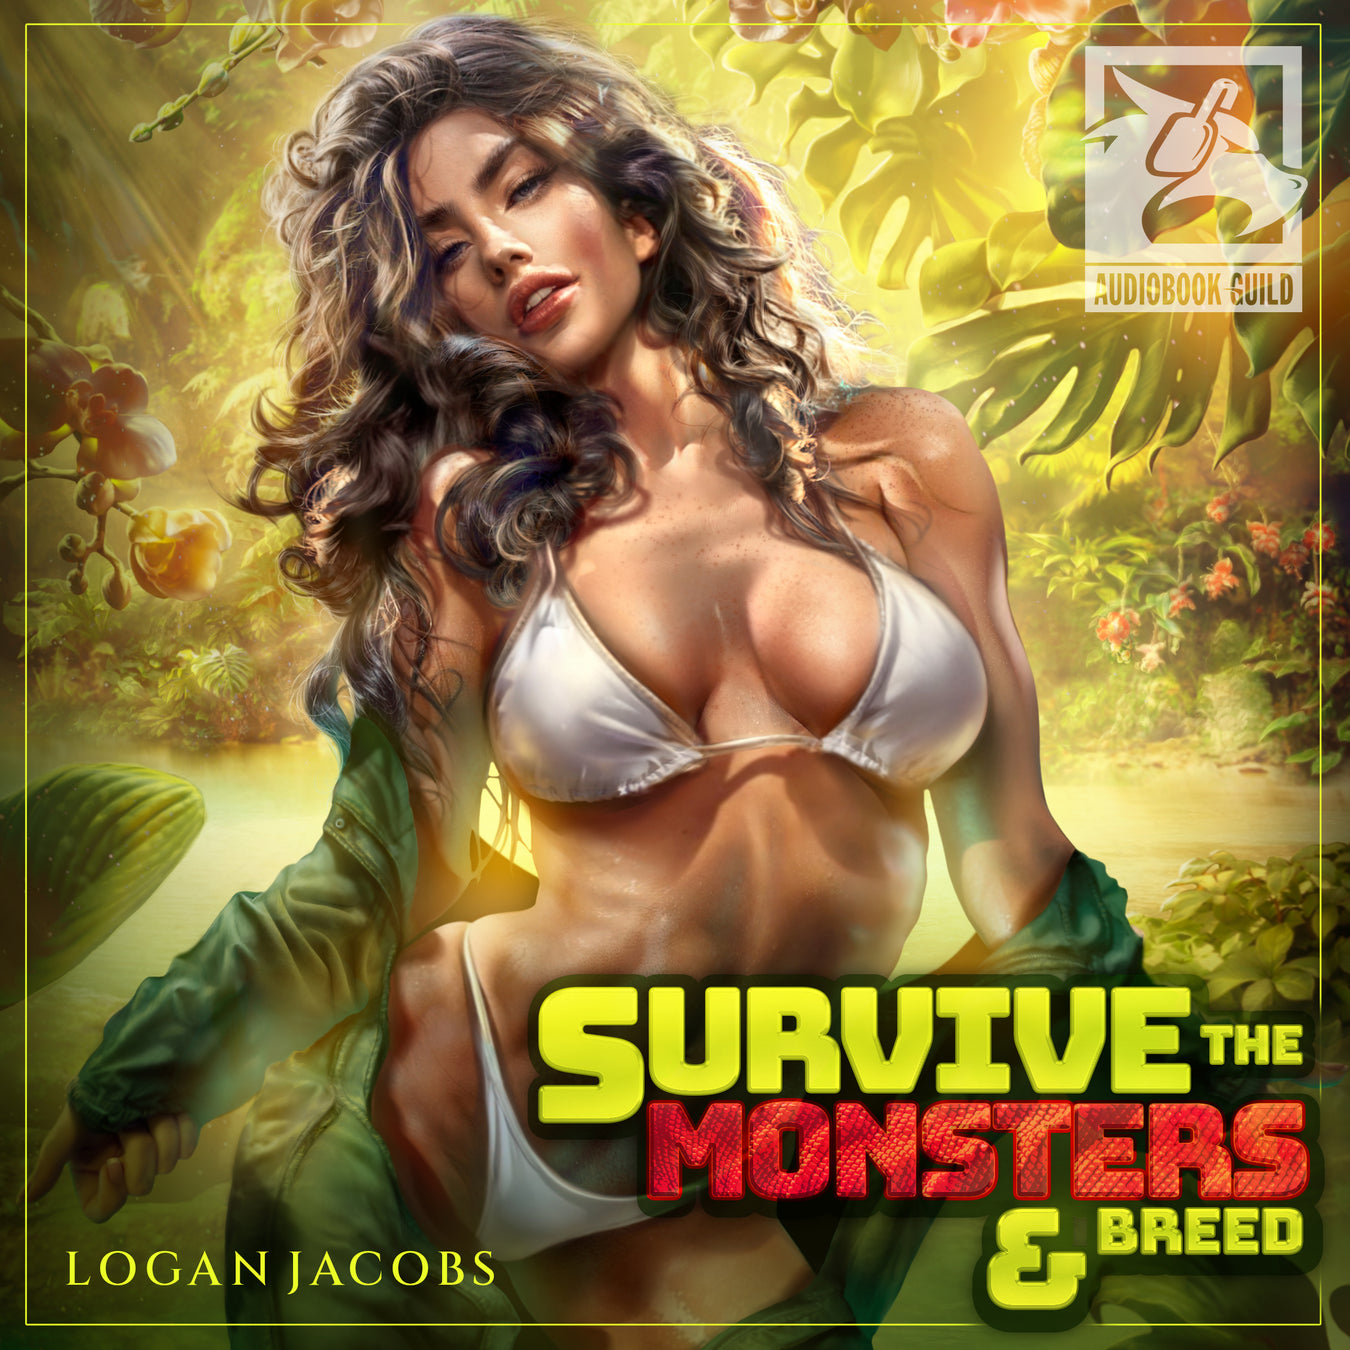 Survive the Monsters and Breed by Logan Jacobs